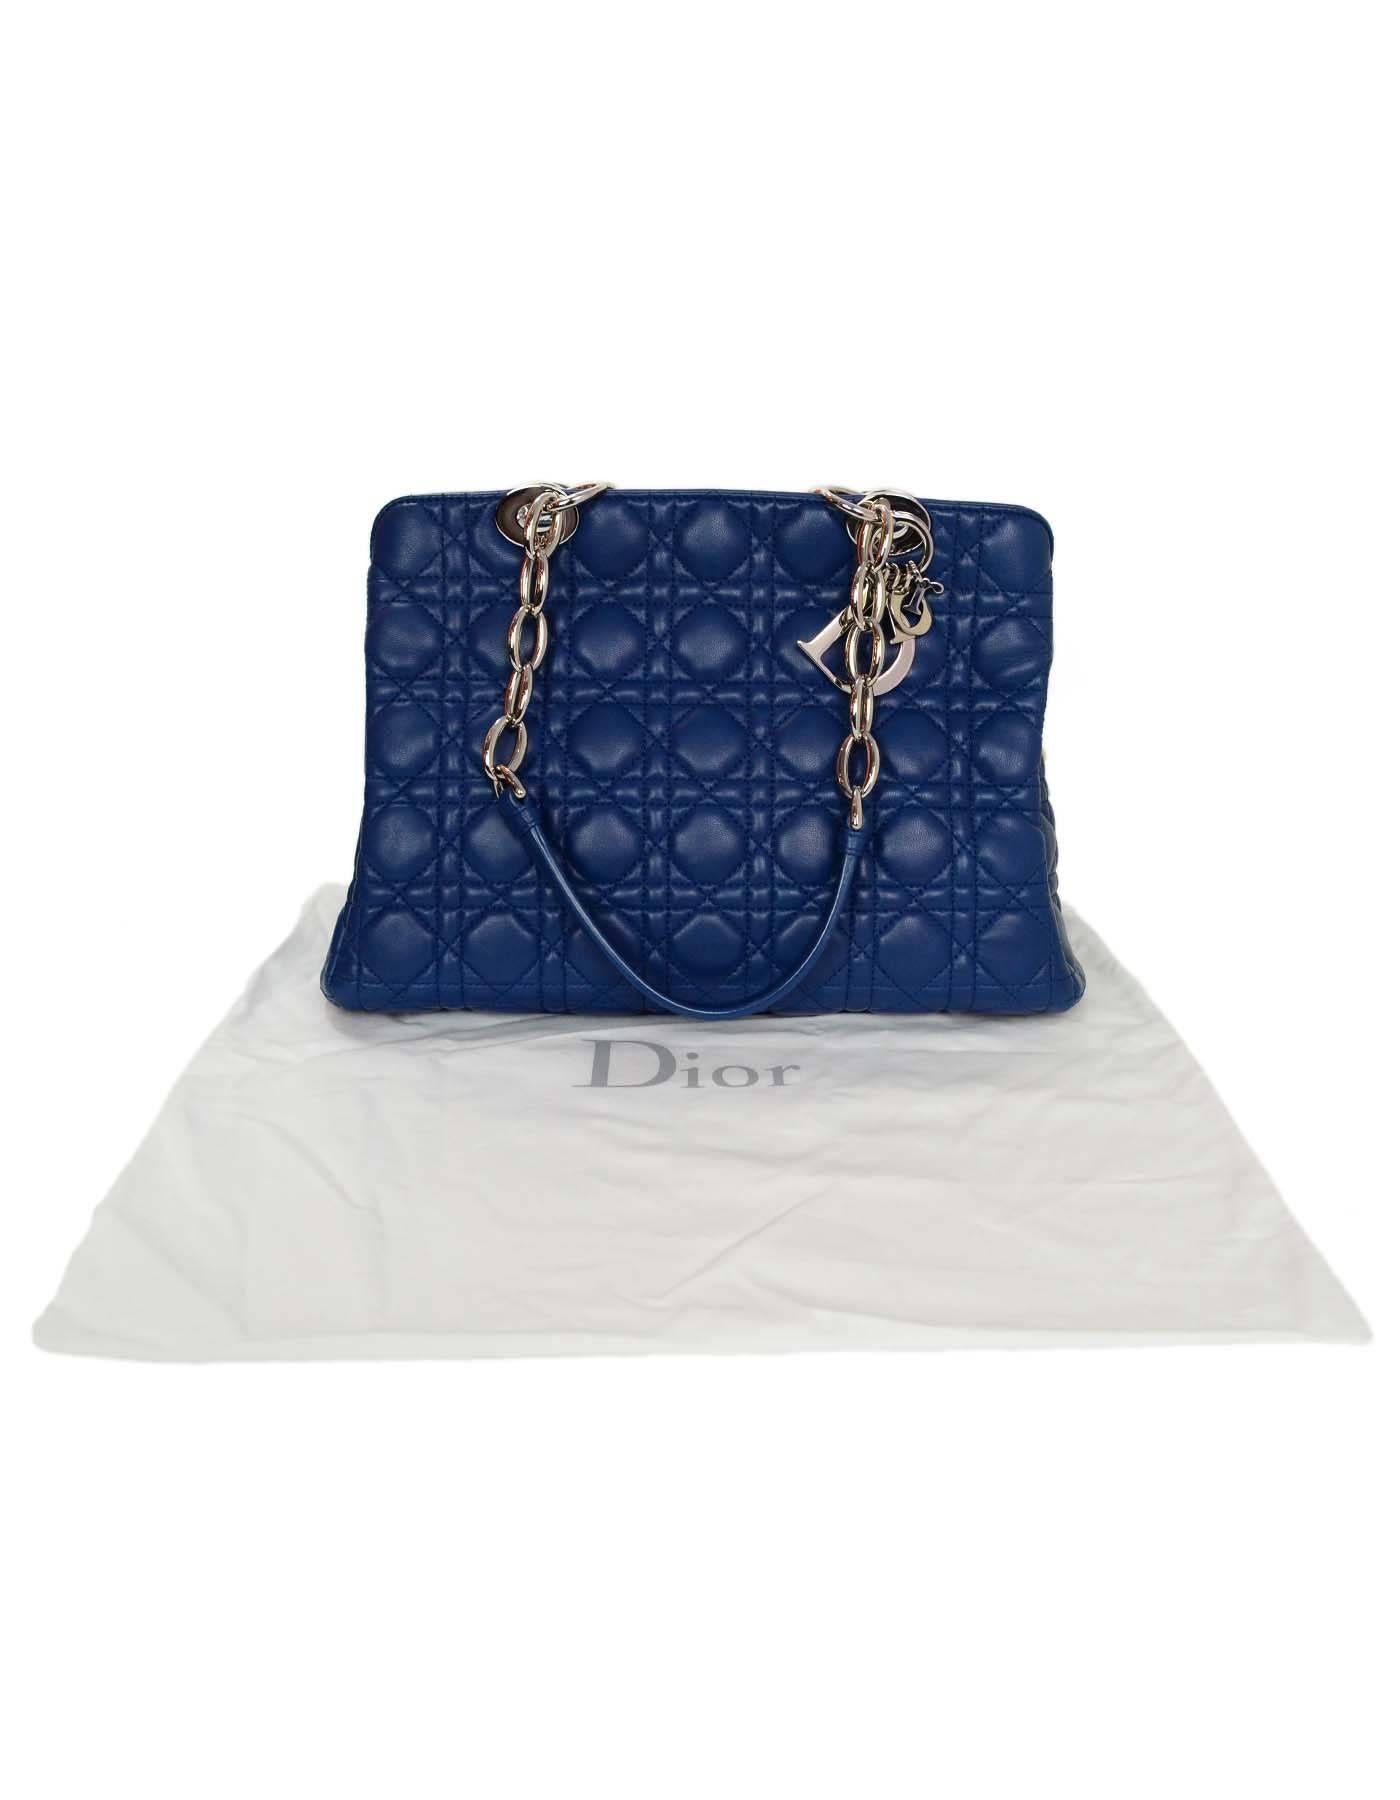 Christian Dior Marine Blue Cannage Quilted Soft Leather Zipper Shopping Tote Bag 4